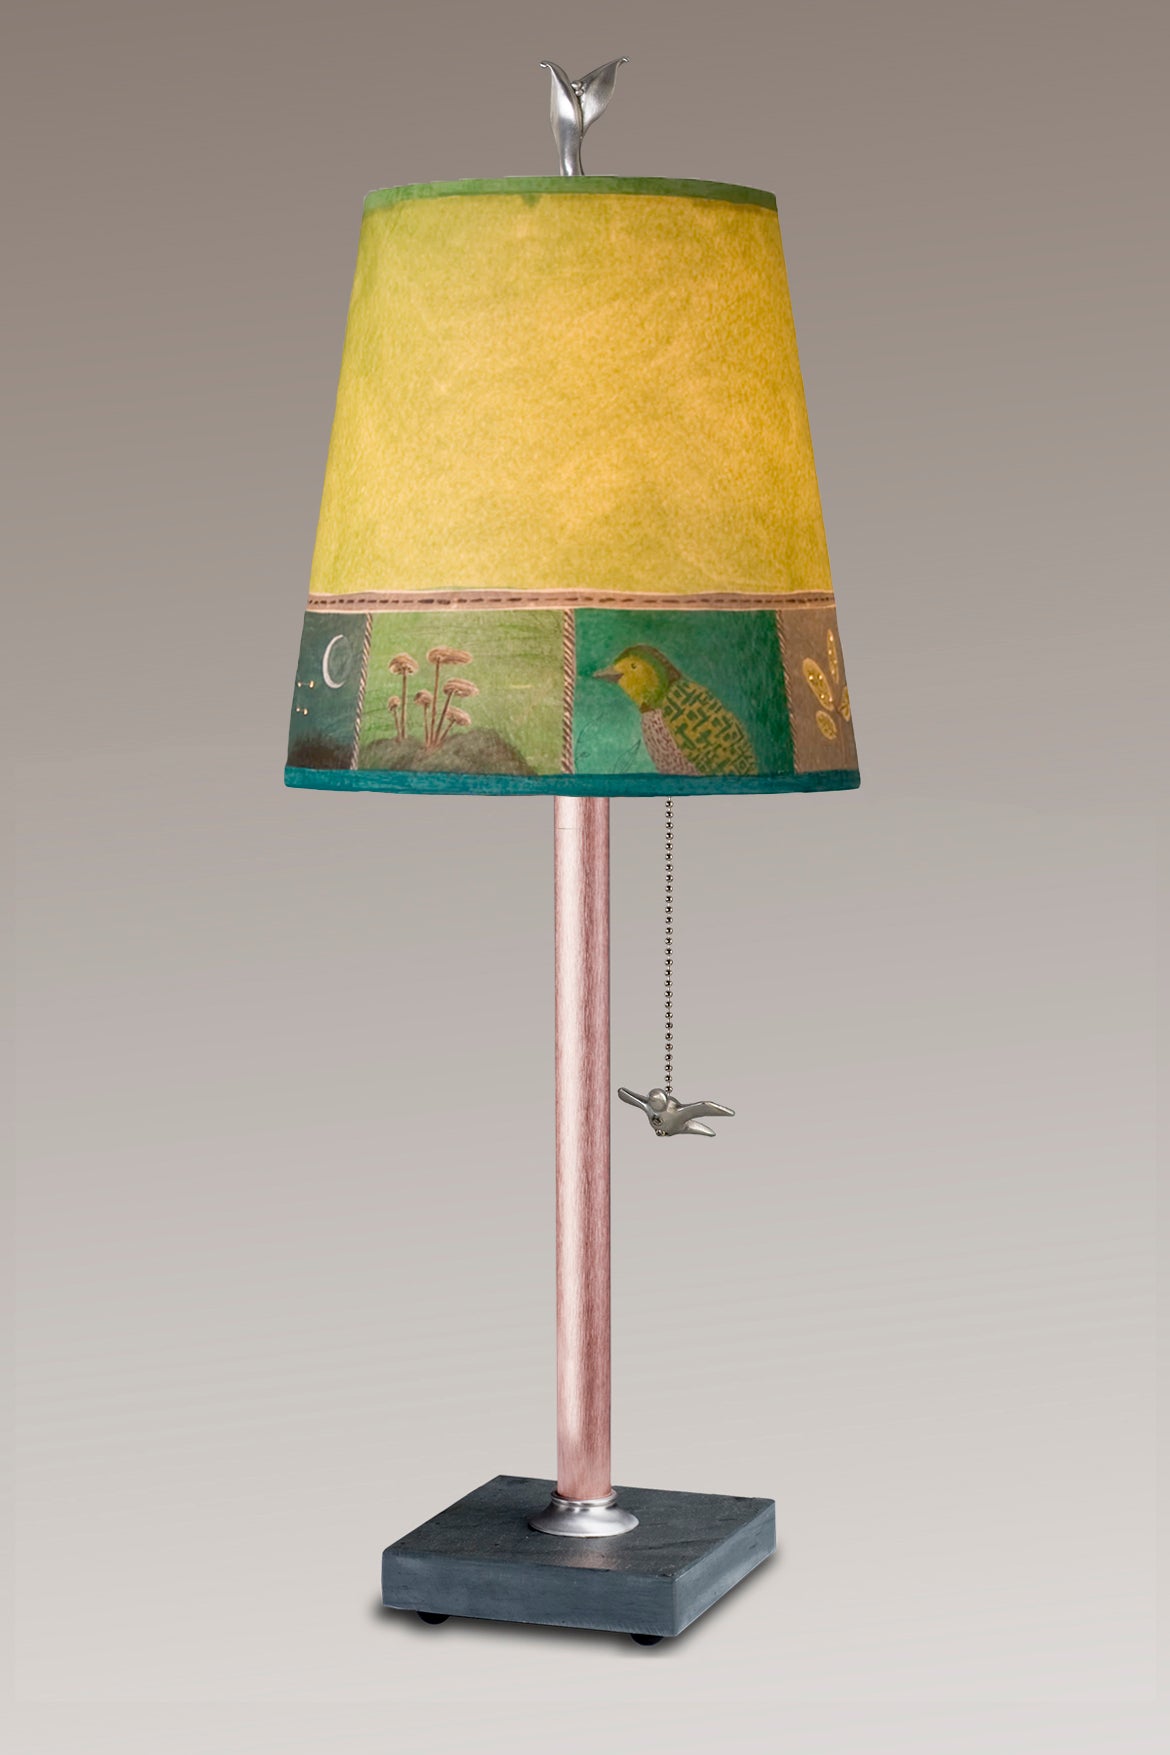 Janna Ugone &amp; Co Table Lamps Copper Table Lamp with Small Drum in Woodland Trails in Leaf